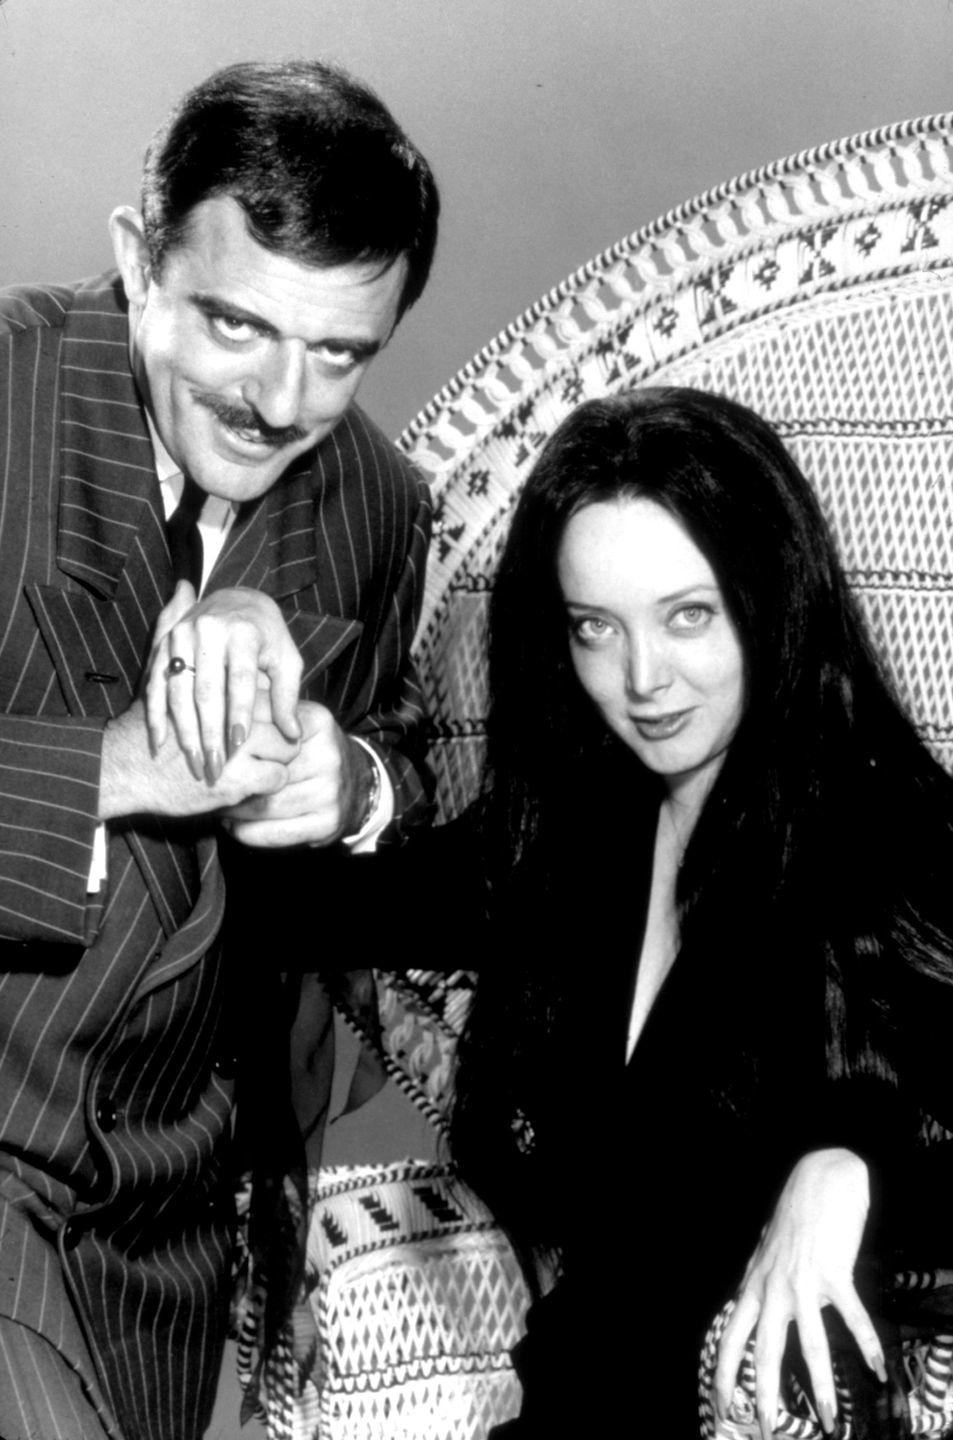 <p>America's favorite creepy, kooky, and altogether doting TV patriarch is the perfect blend of Halloween appropriate and approachable. The keys to the costume? A patterned suit, a killer mustache, and a black-clad "cara mia" to complete the <em>Addams Family</em> vibe. </p>